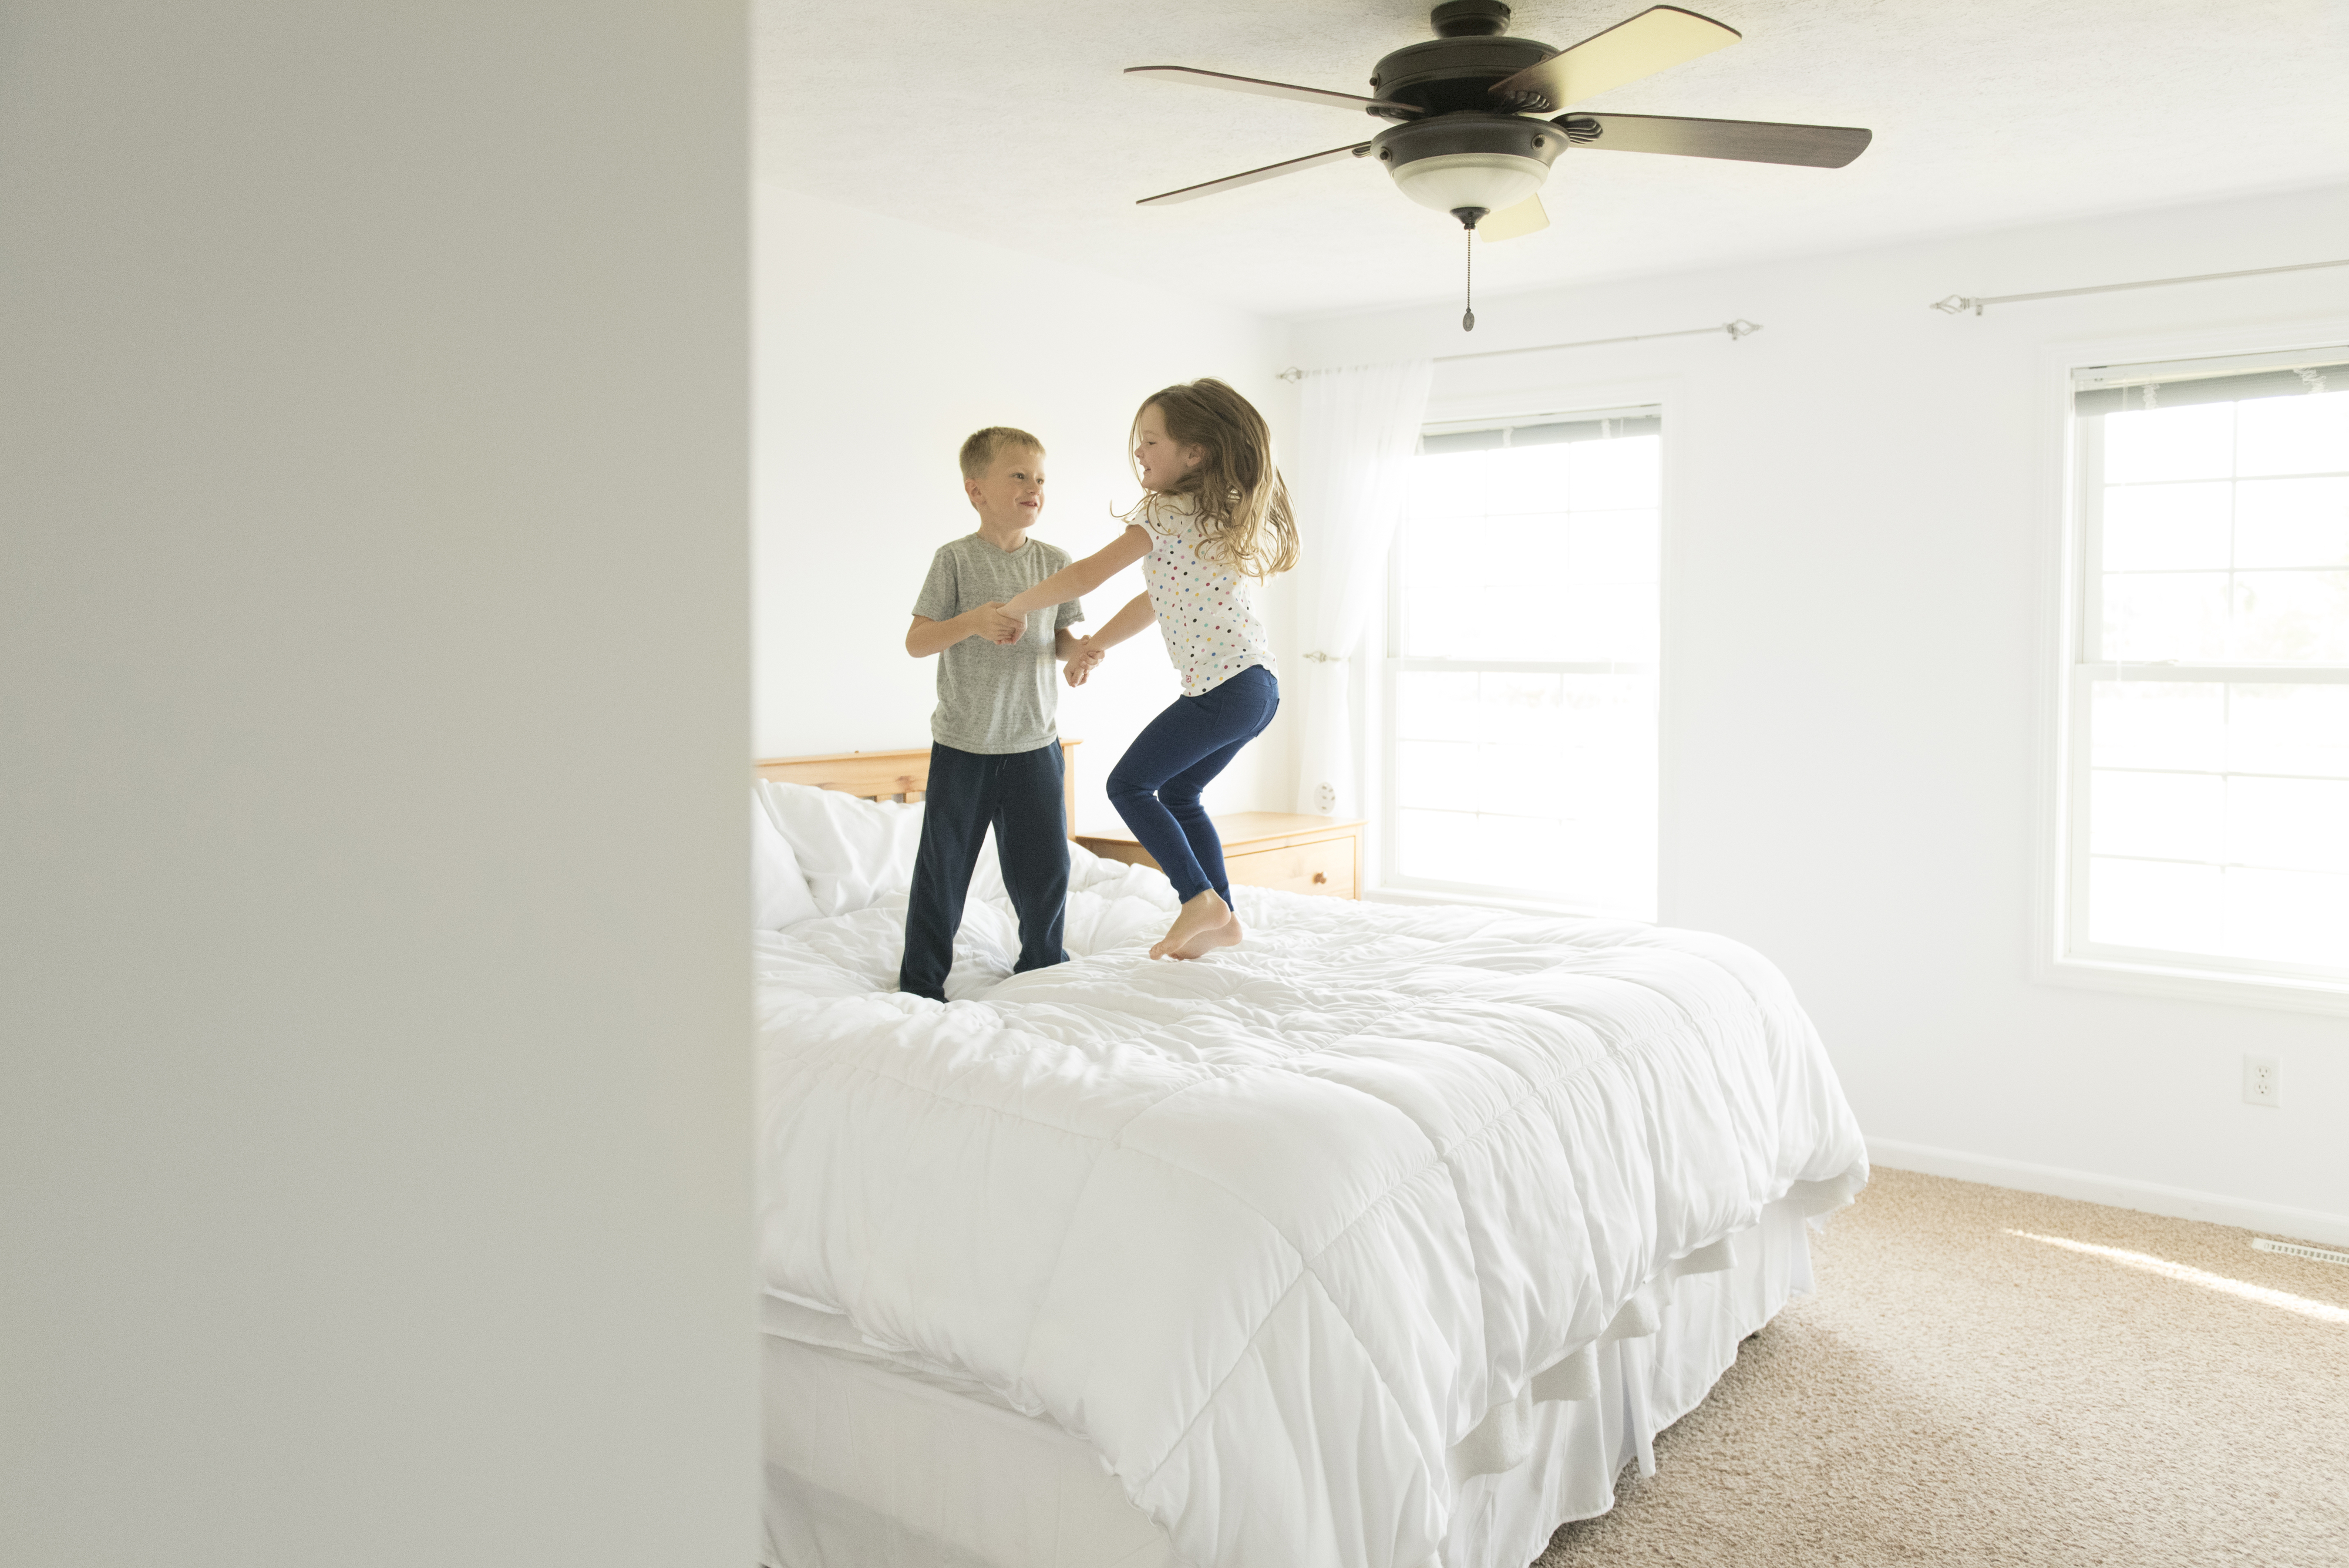 Two children, a boy and a girl, jump on a large white bed in a bright bedroom with a ceiling fan and two windows